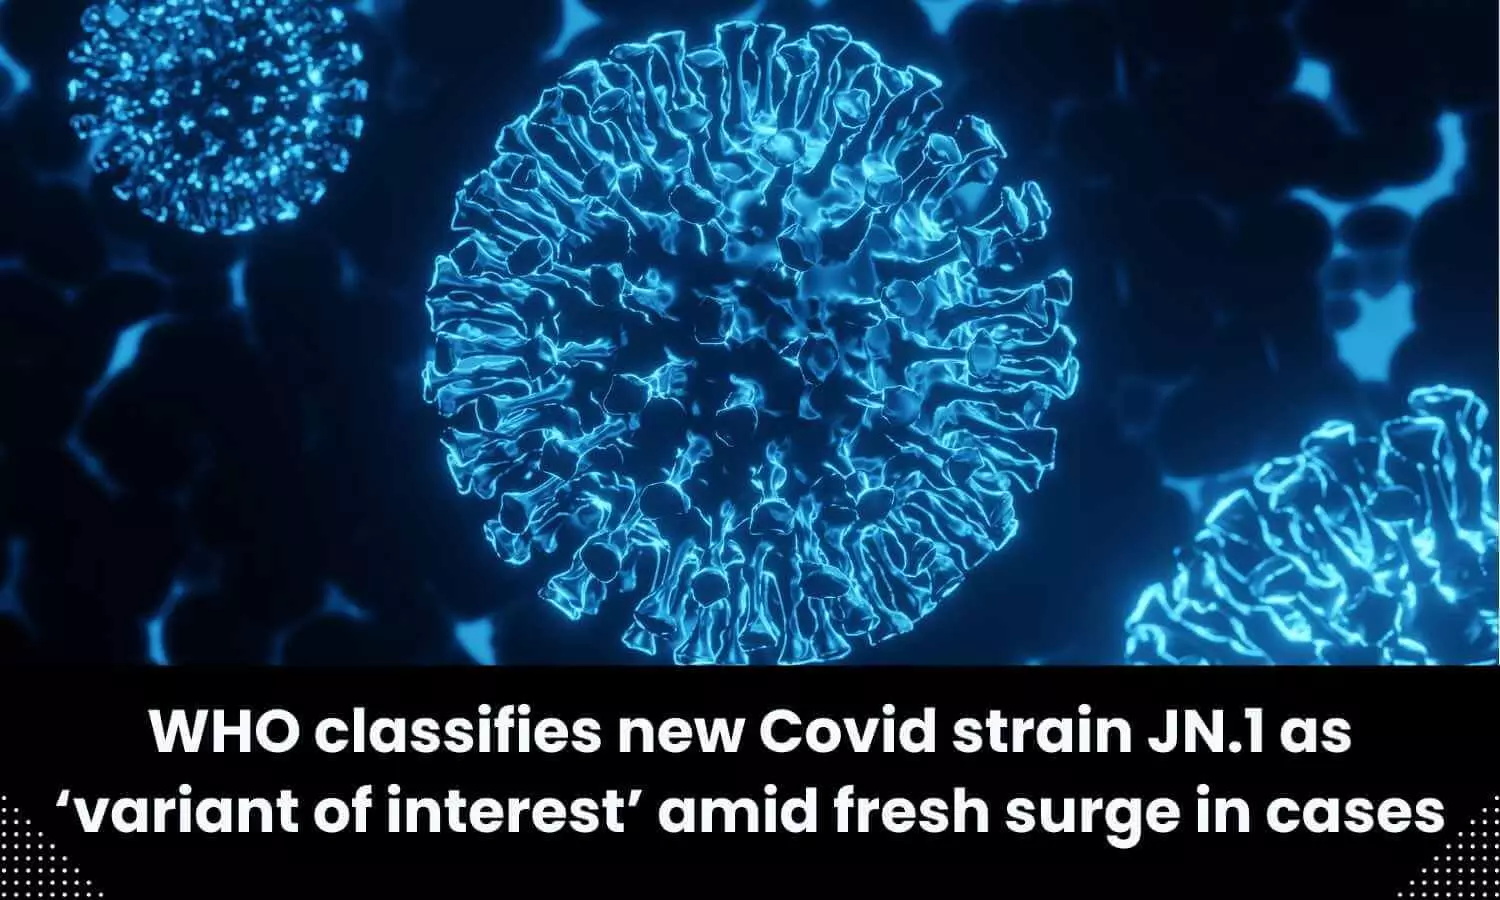 WHO classifies new Covid strain JN.1 as ‘variant of interest’